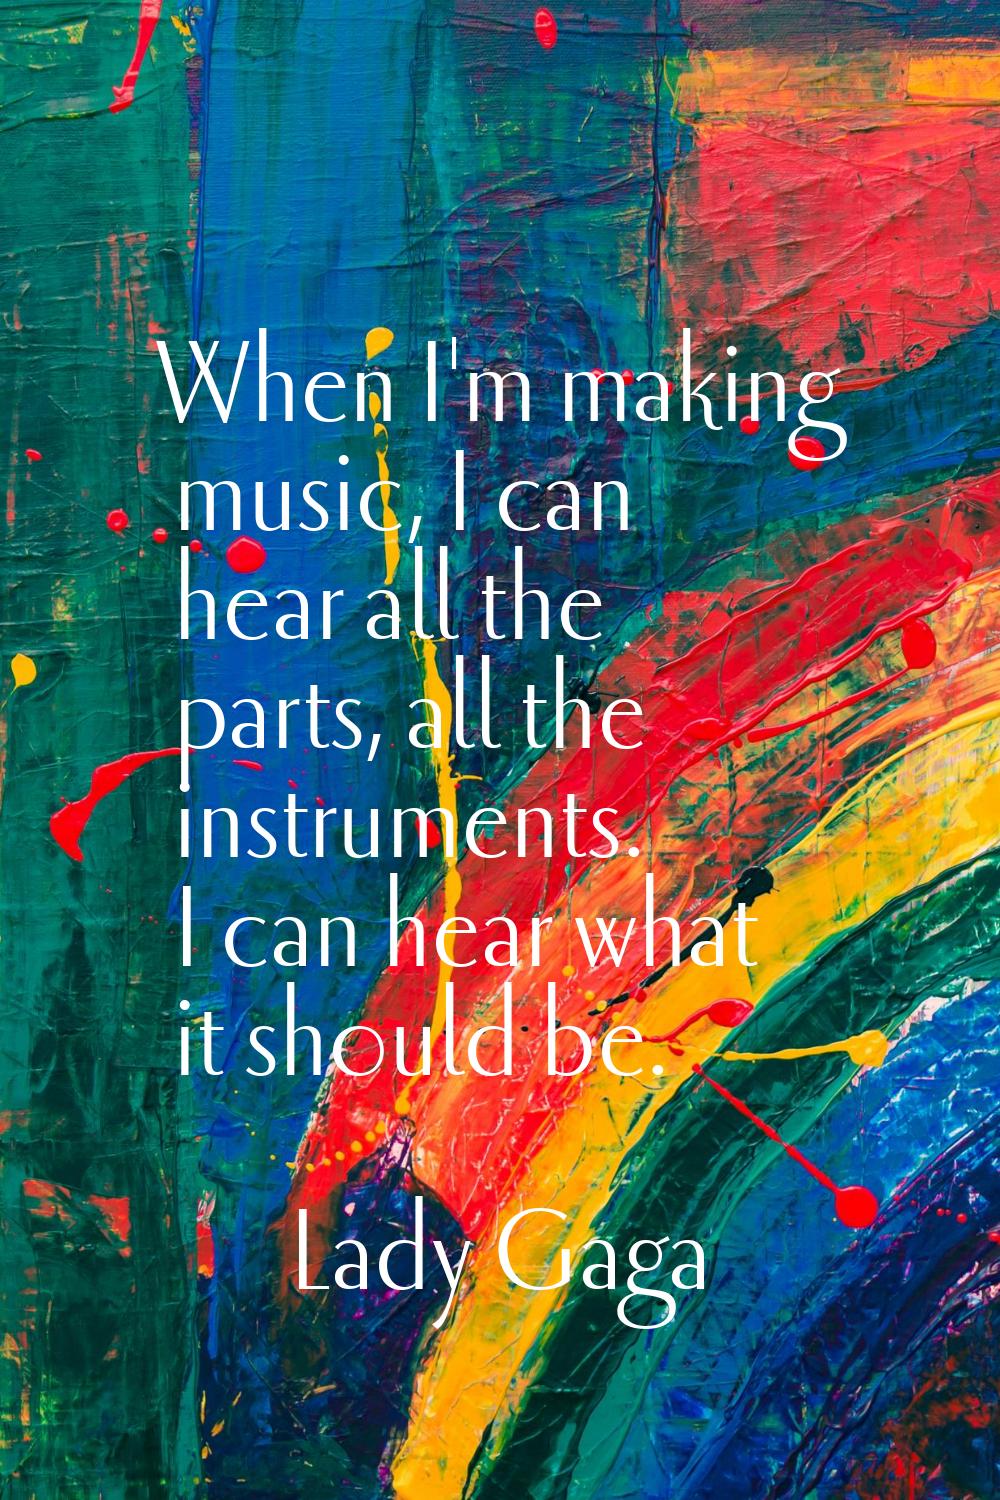 When I'm making music, I can hear all the parts, all the instruments. I can hear what it should be.